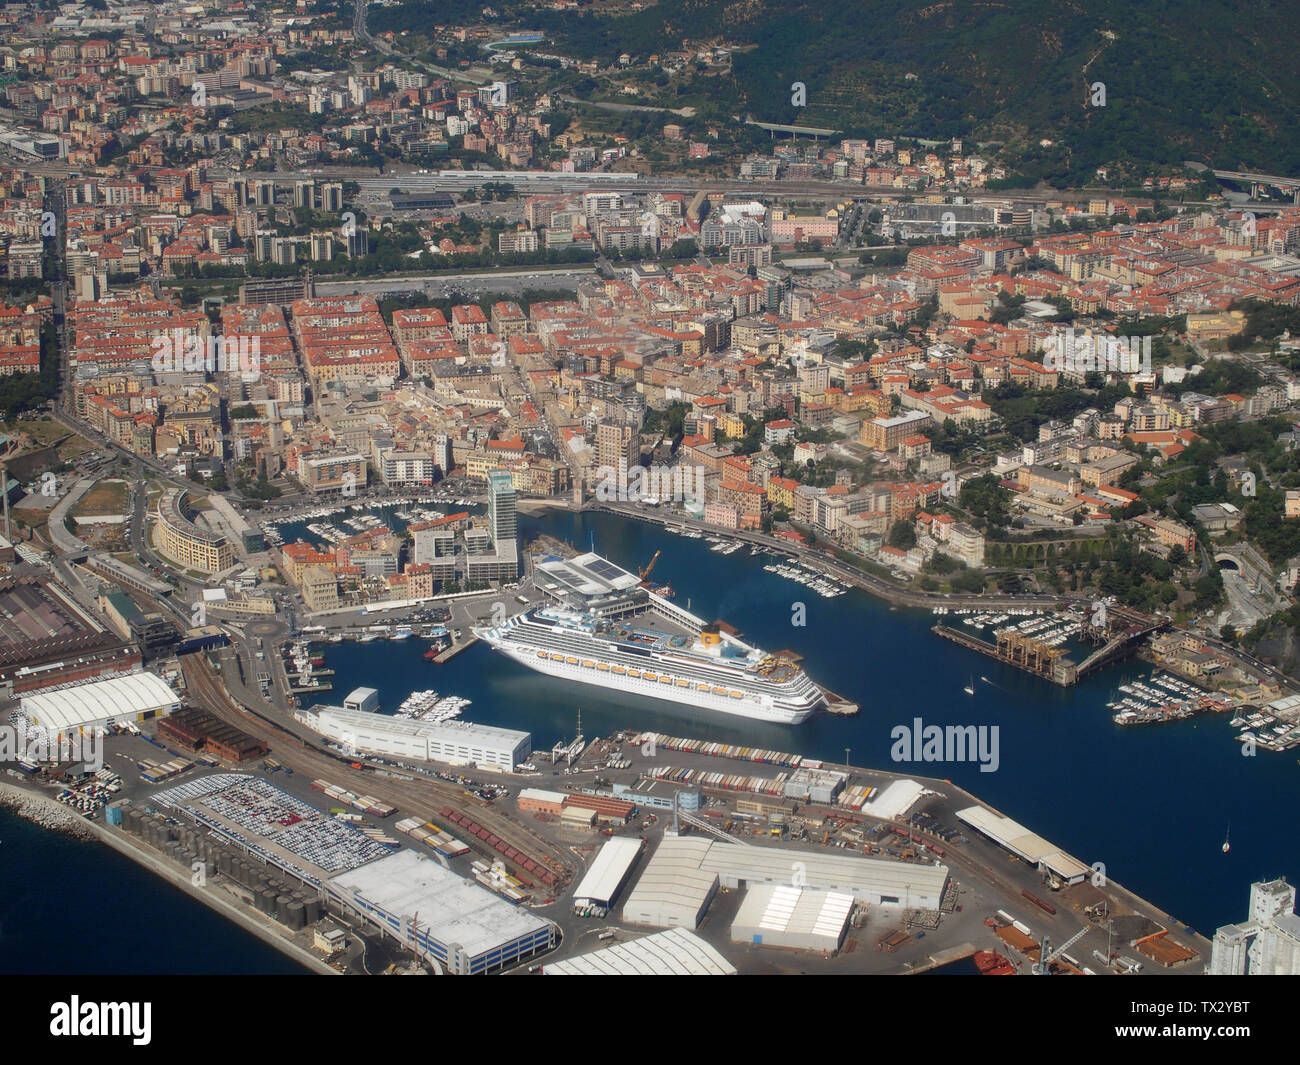 Aerial view of the Port of Savona, with docks and the cruise ship Costa Fascinosa on anchor at the Palacrociere Terminal in the 'Darsena Nuova'. Stock Photo